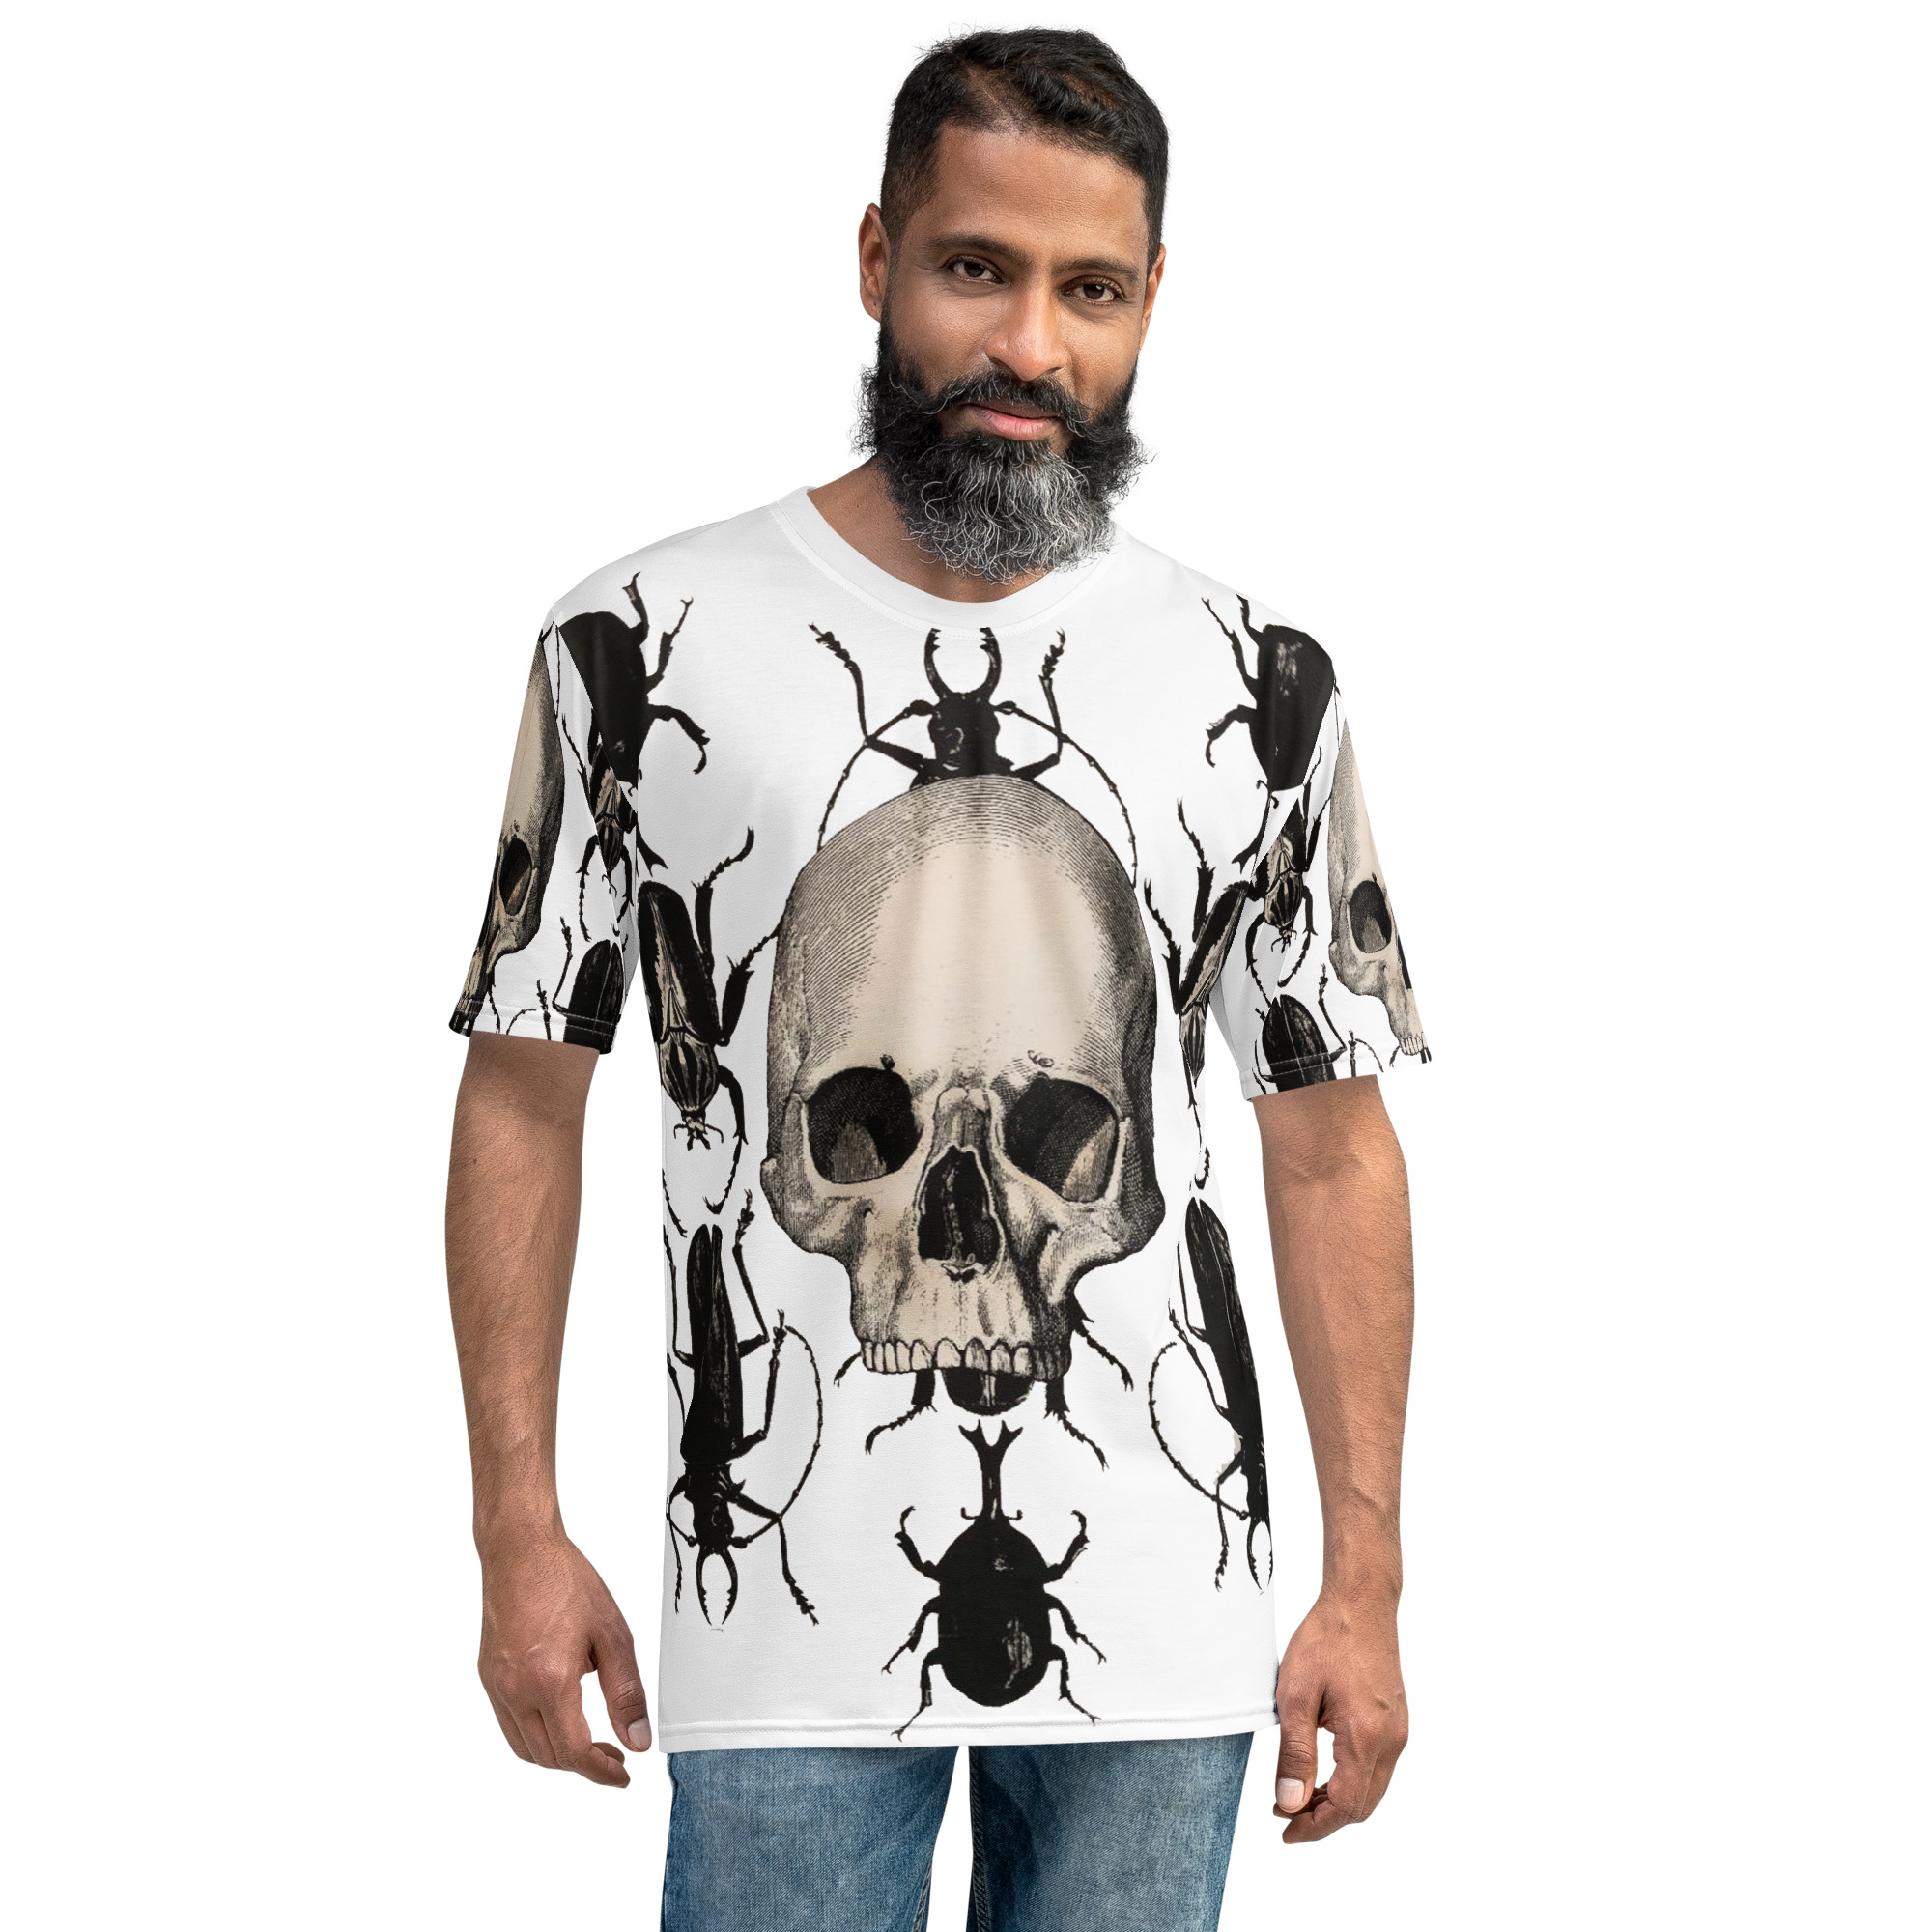 all-over-print-mens-crew-neck-t-shirt-white-front-63237a29d2f84.jpg